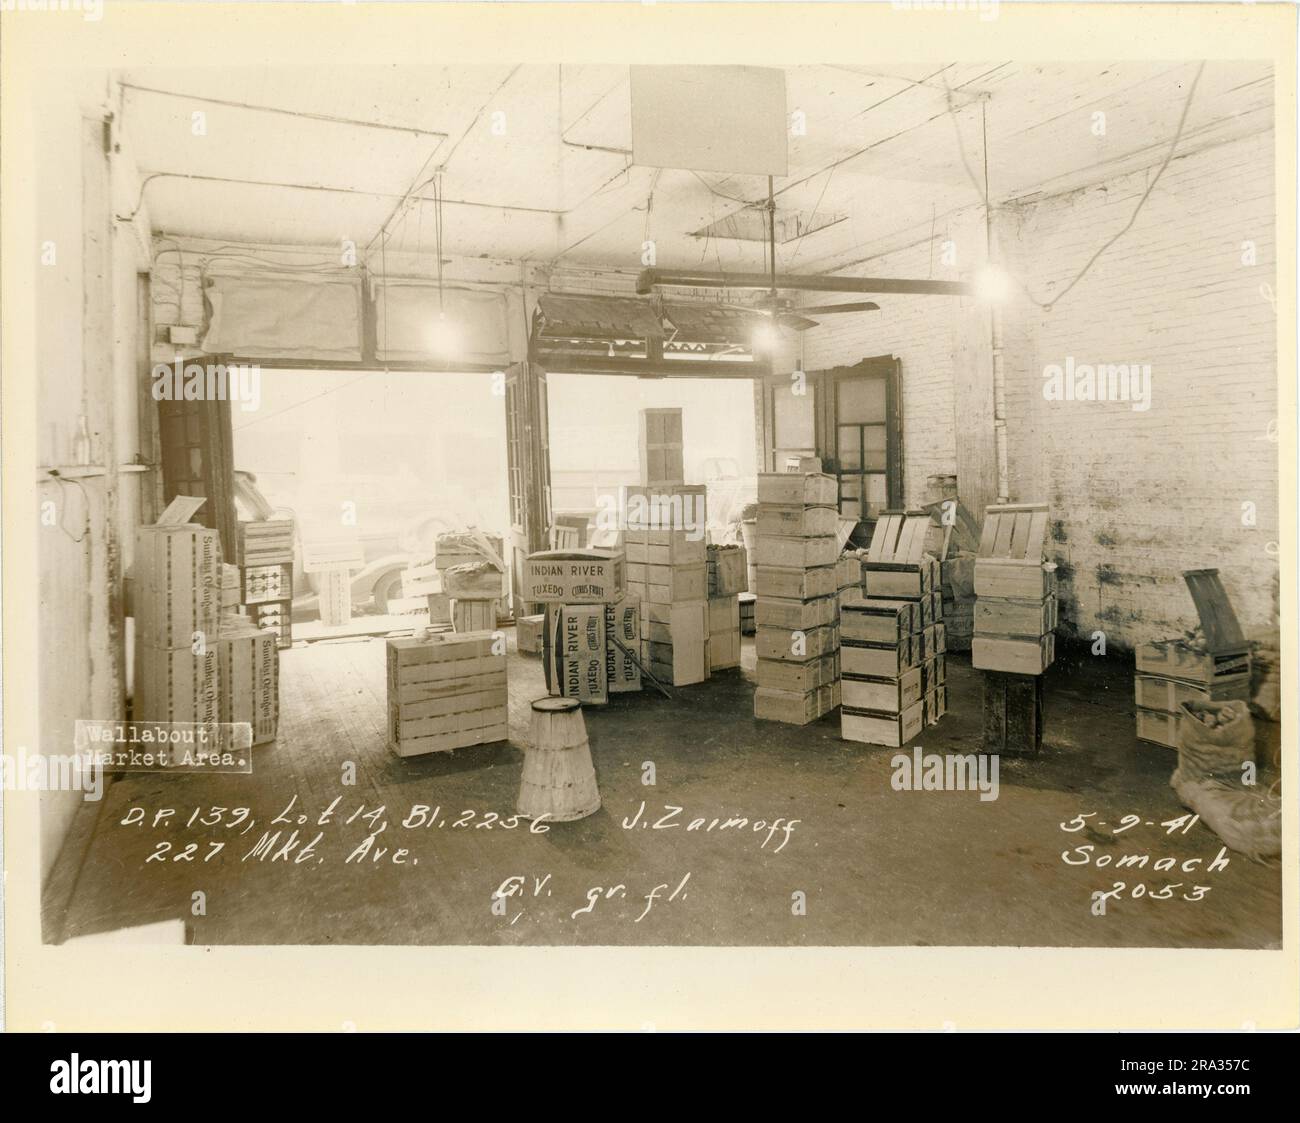 Photograph of interior of lot 14, Bl. 2256, 227 Mkt. Ave, ground floor of J. Zaimoff, D.P. 139. Stock Photo